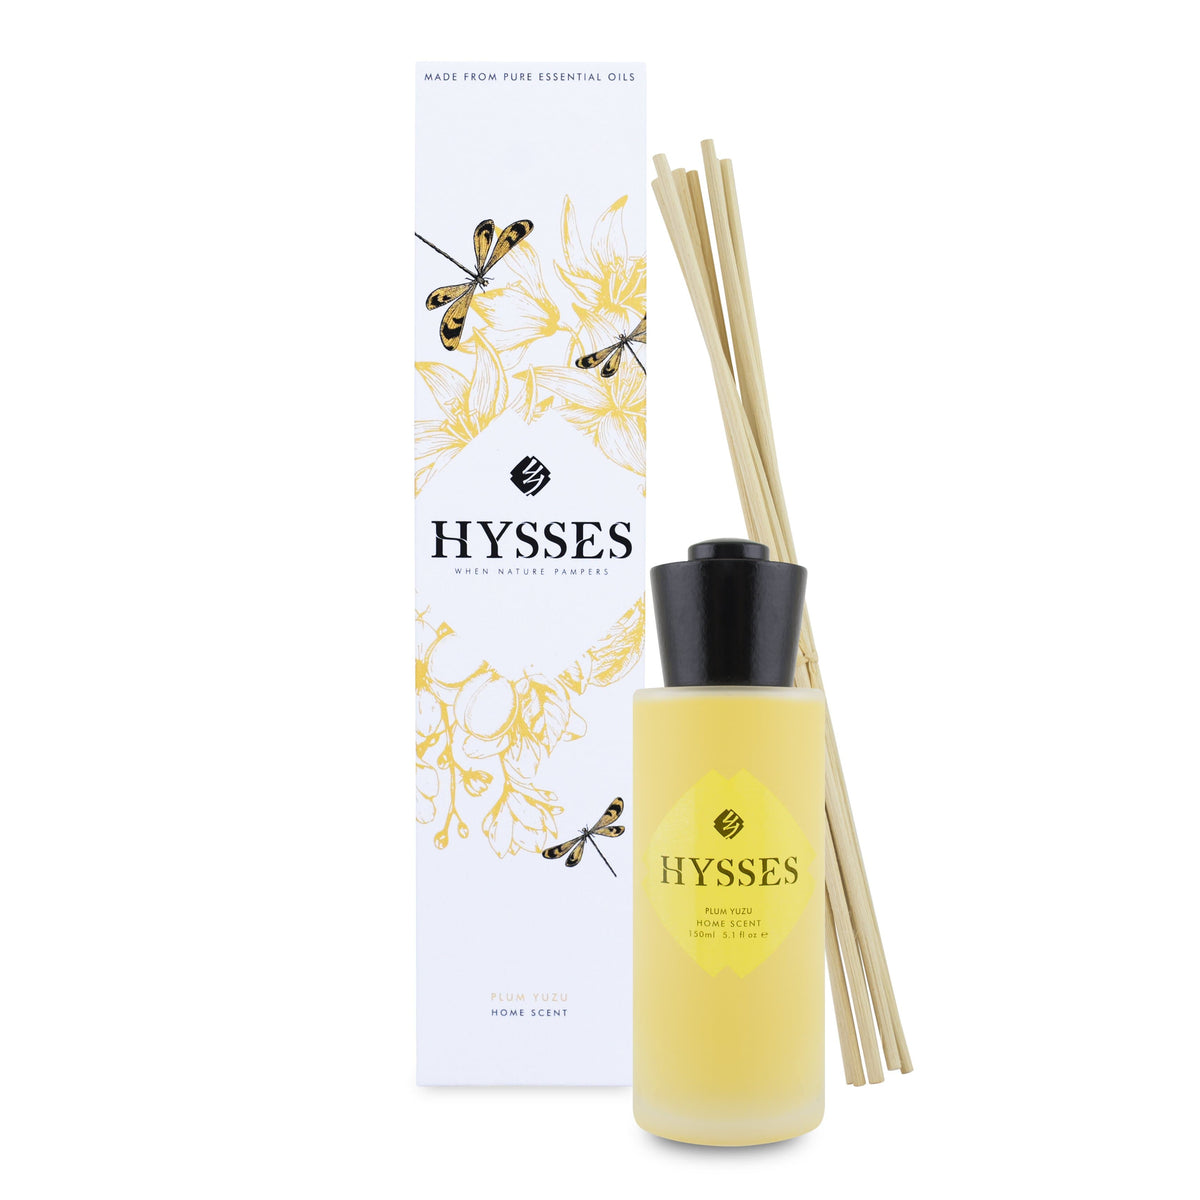 Hysses Home Scents 150ml Home Scent Reed Diffuser Plum Yuzu